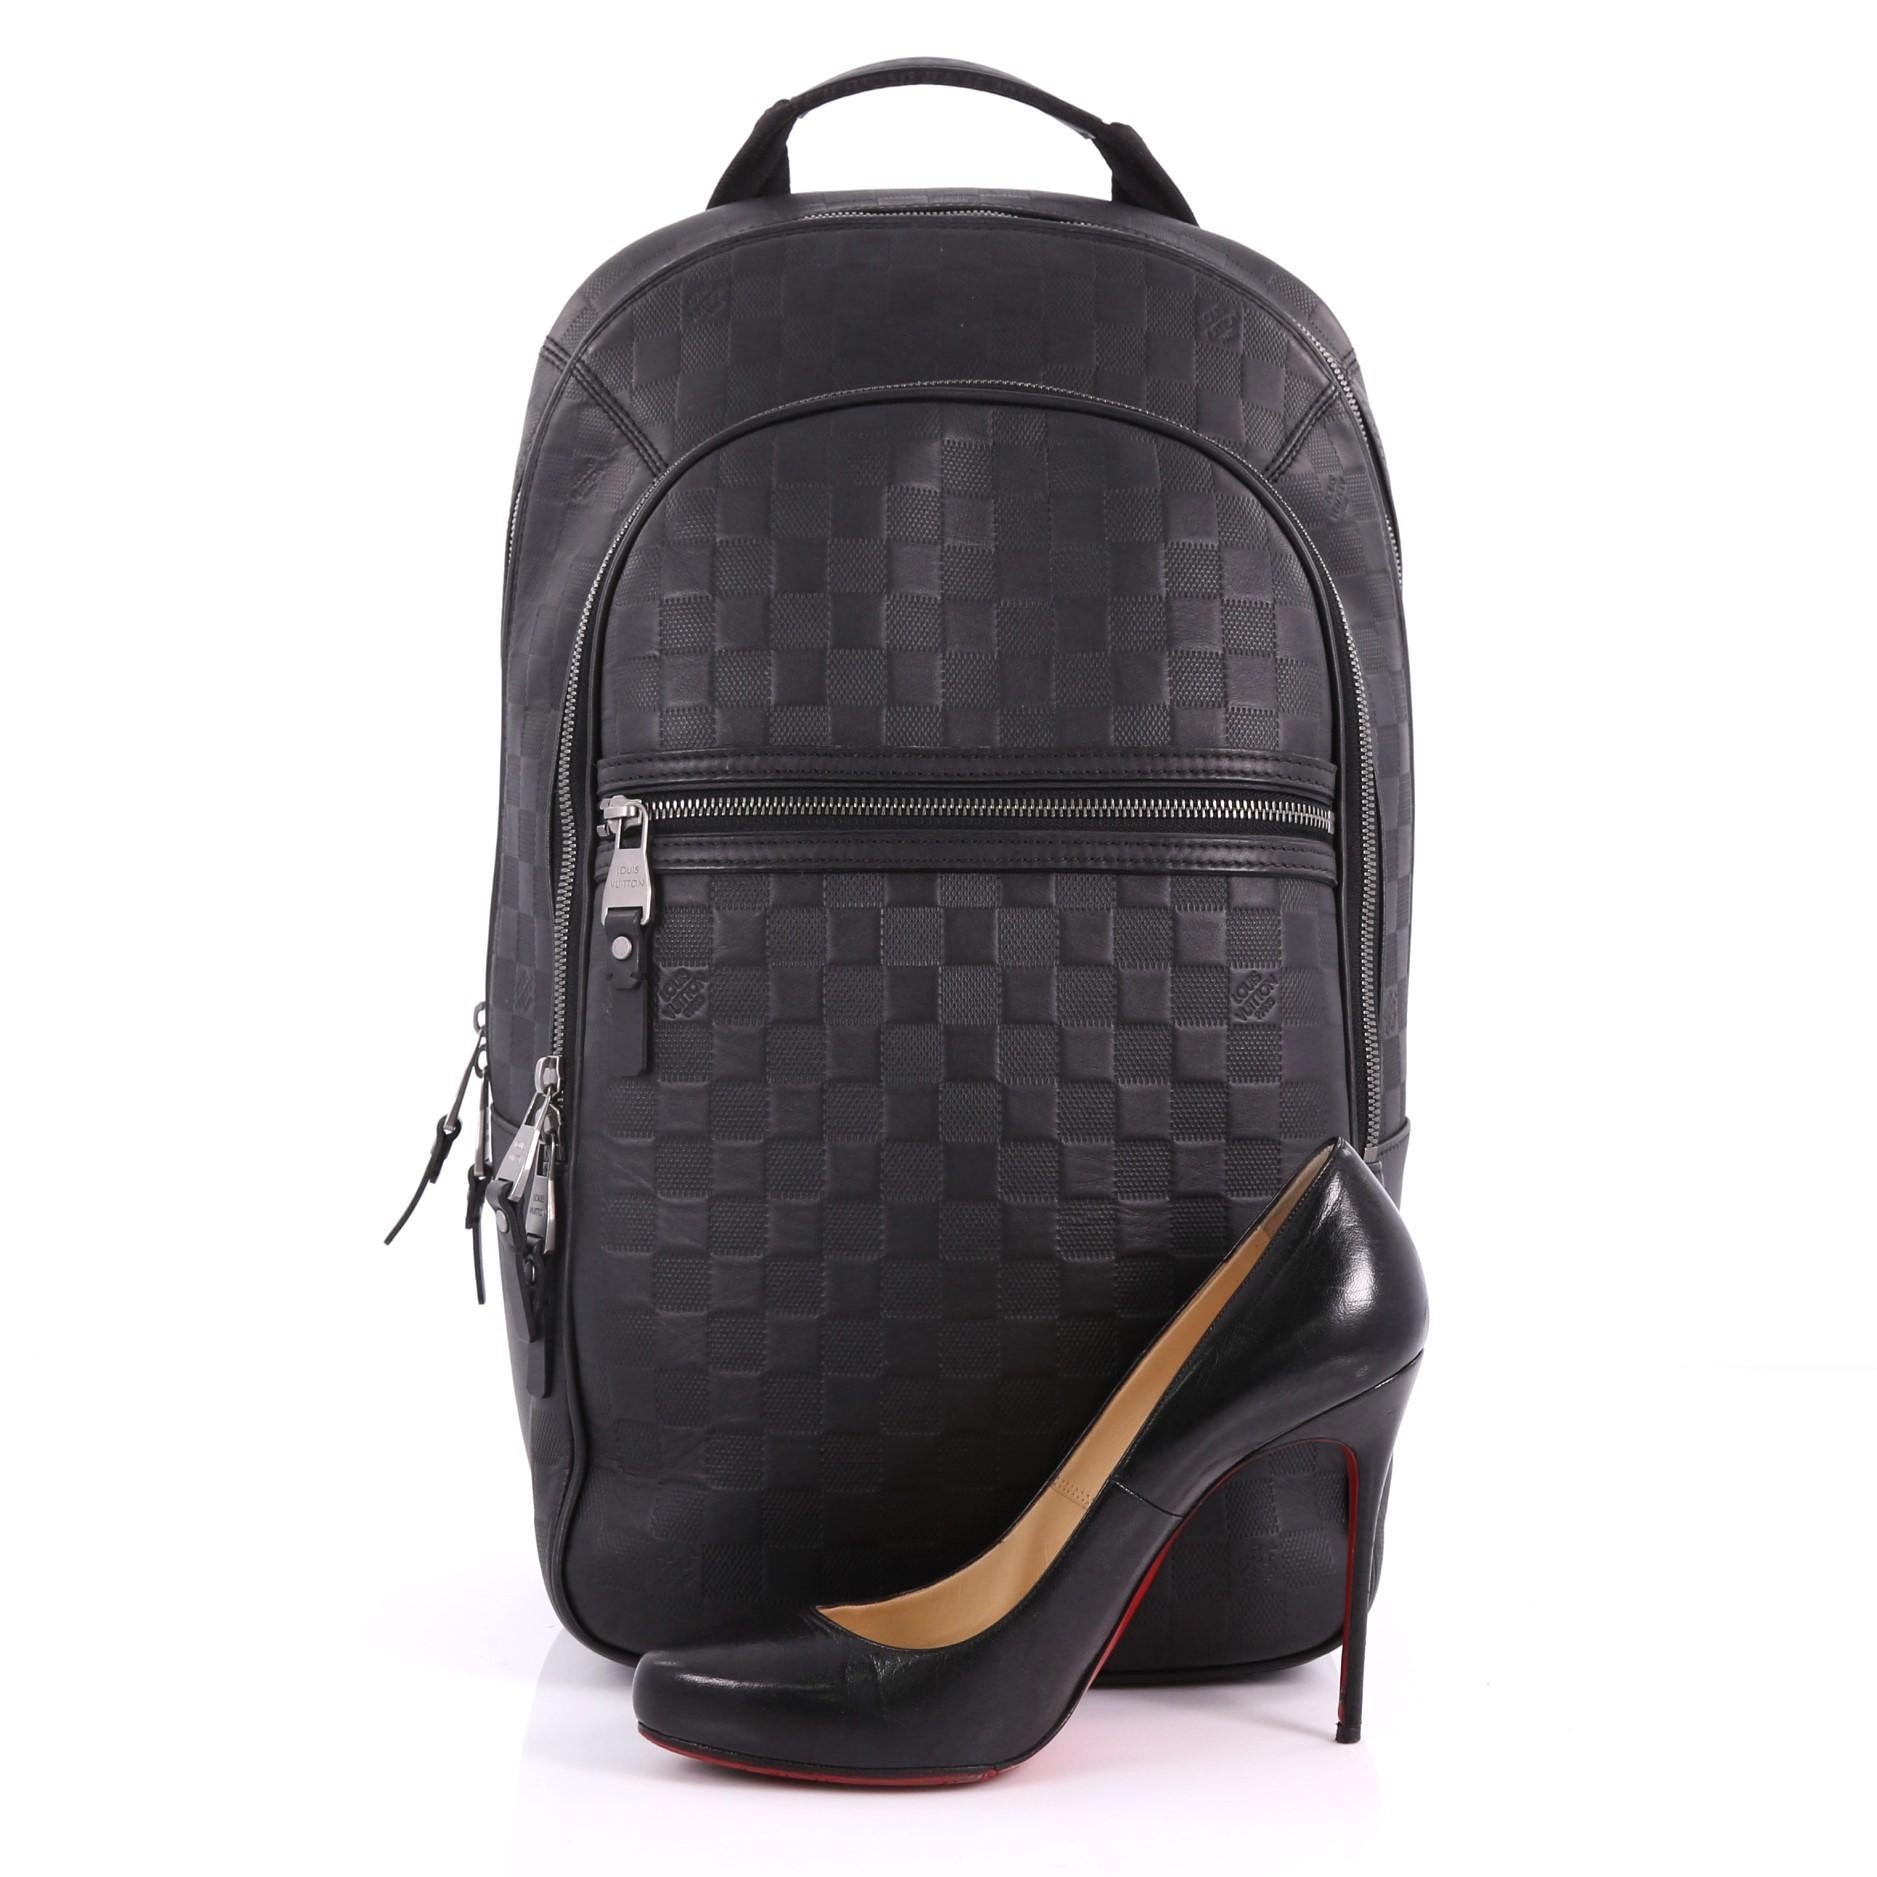 This Louis Vuitton Michael NM Backpack Damier Infini Leather, crafted in black damier infini leather, features a short flat leather top handle, canvas padded backpack straps, two exterior front zip pockets, matte silver-tone hardware. Its two-way